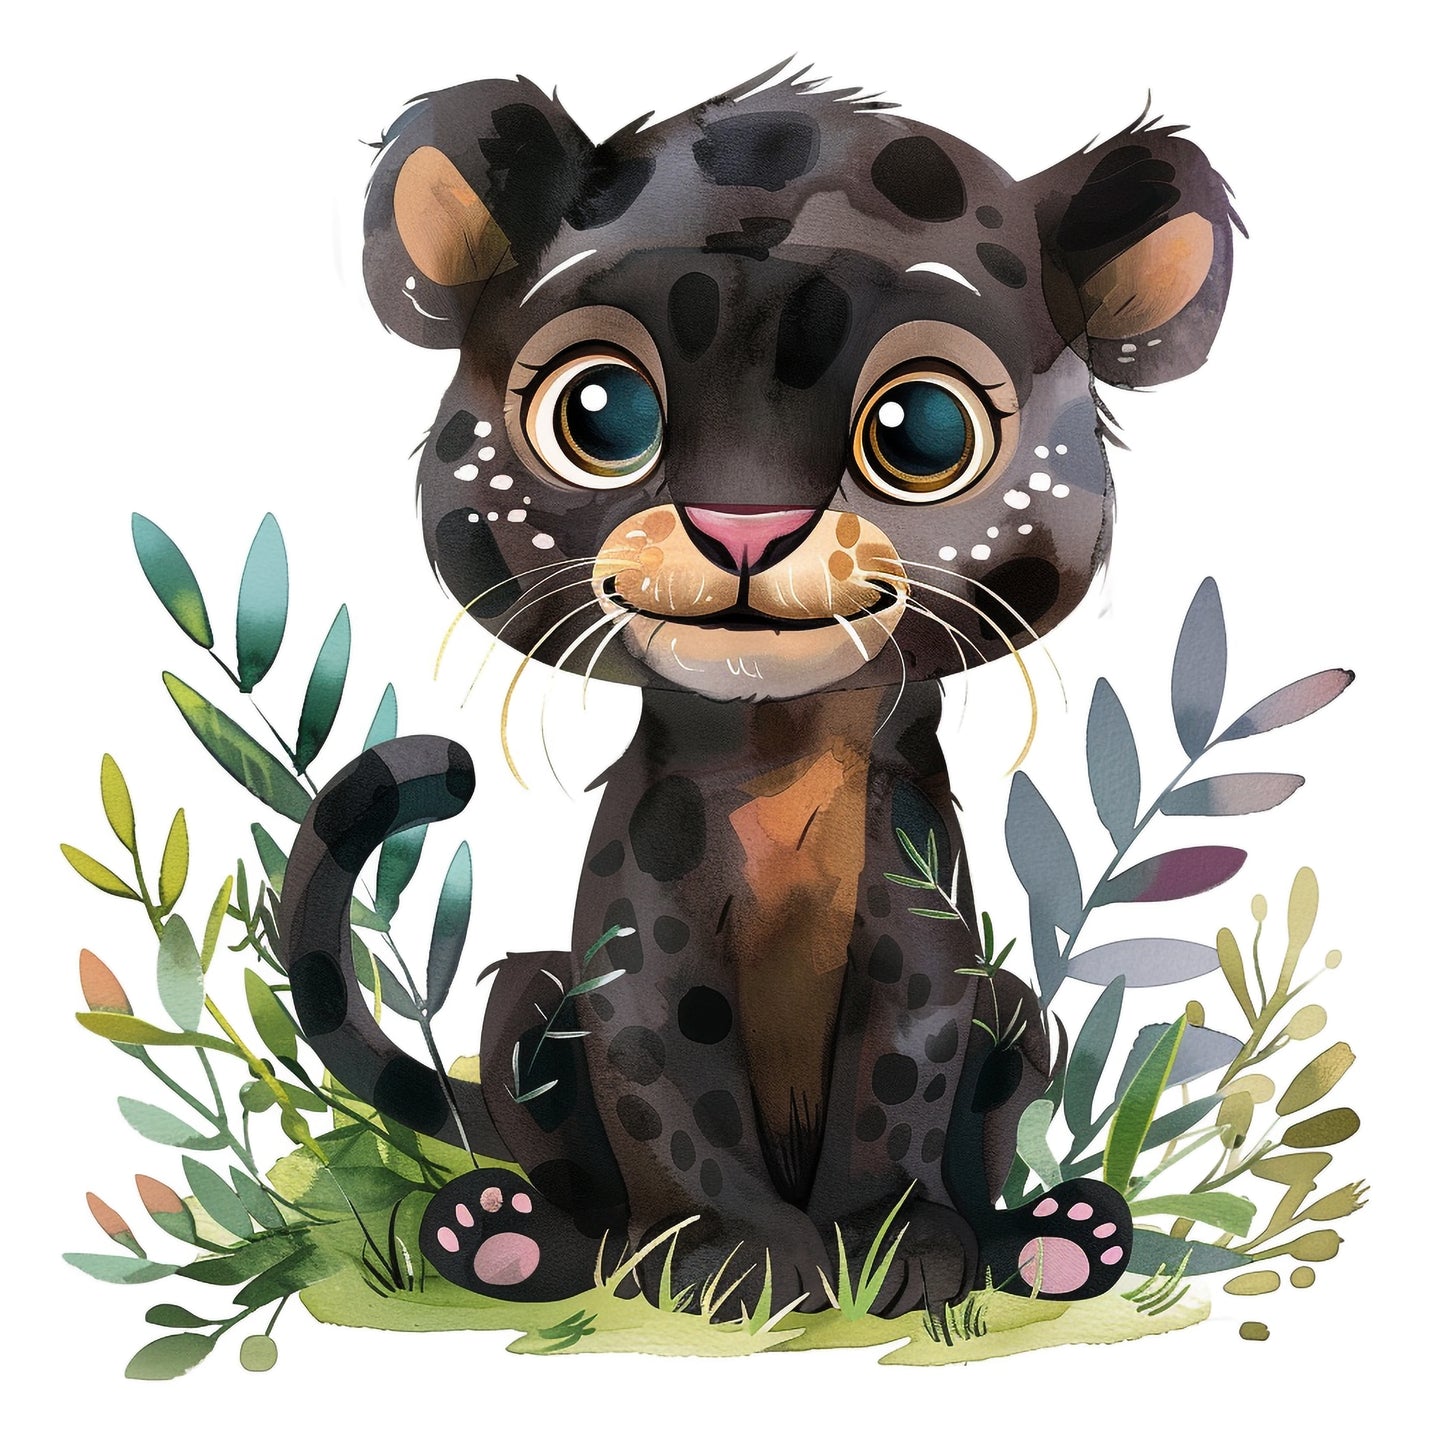 Adorable Watercolor Panther Cub Illustration with Greenery